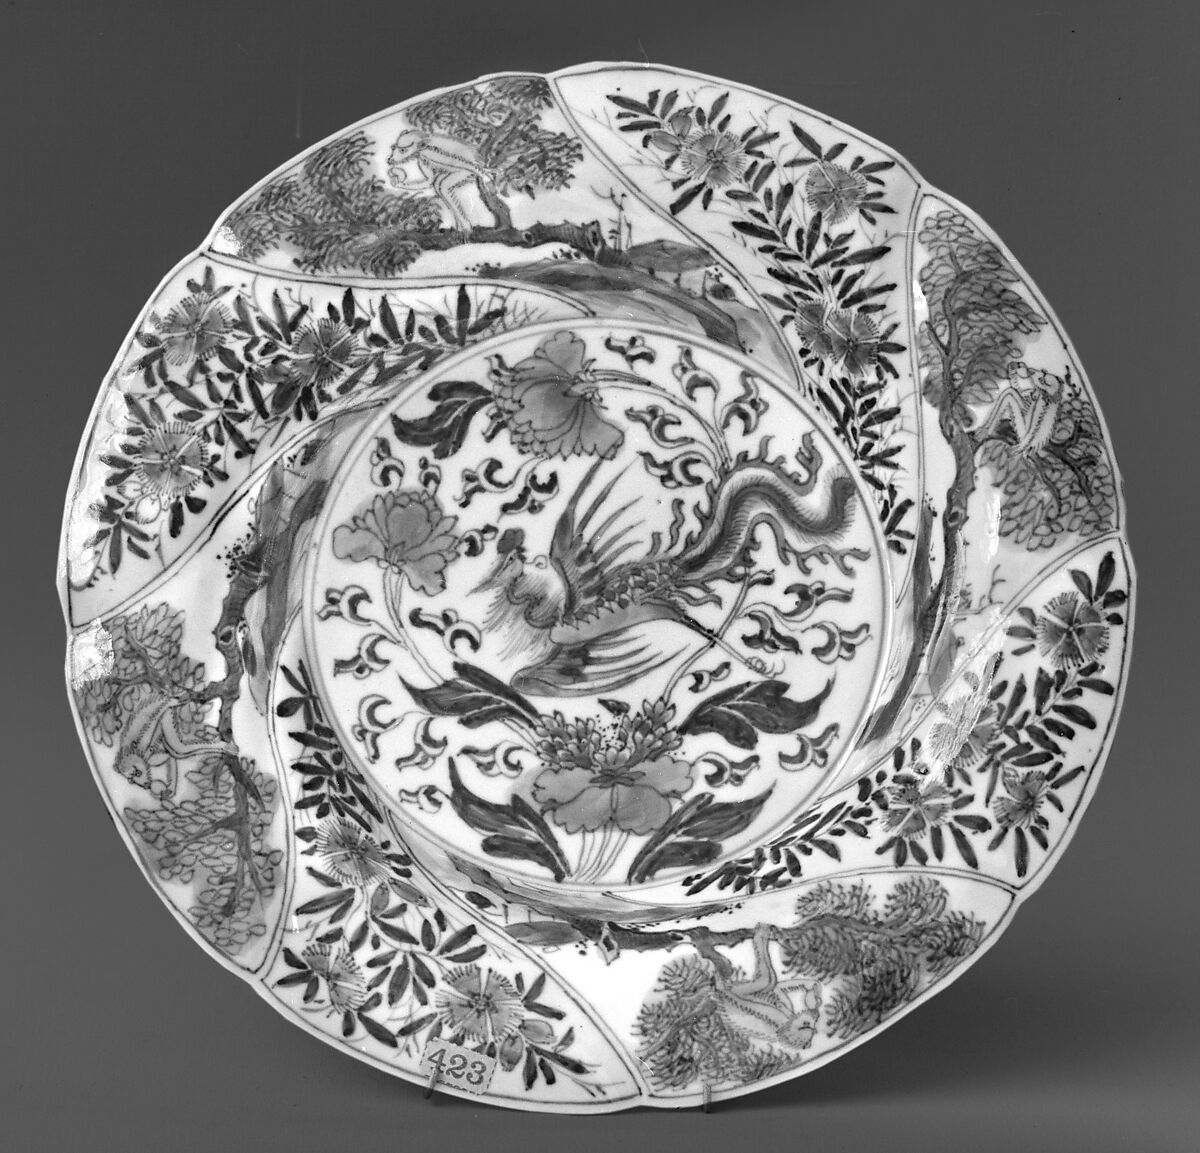 Plate, Porcelain painted in underglaze blue, China 